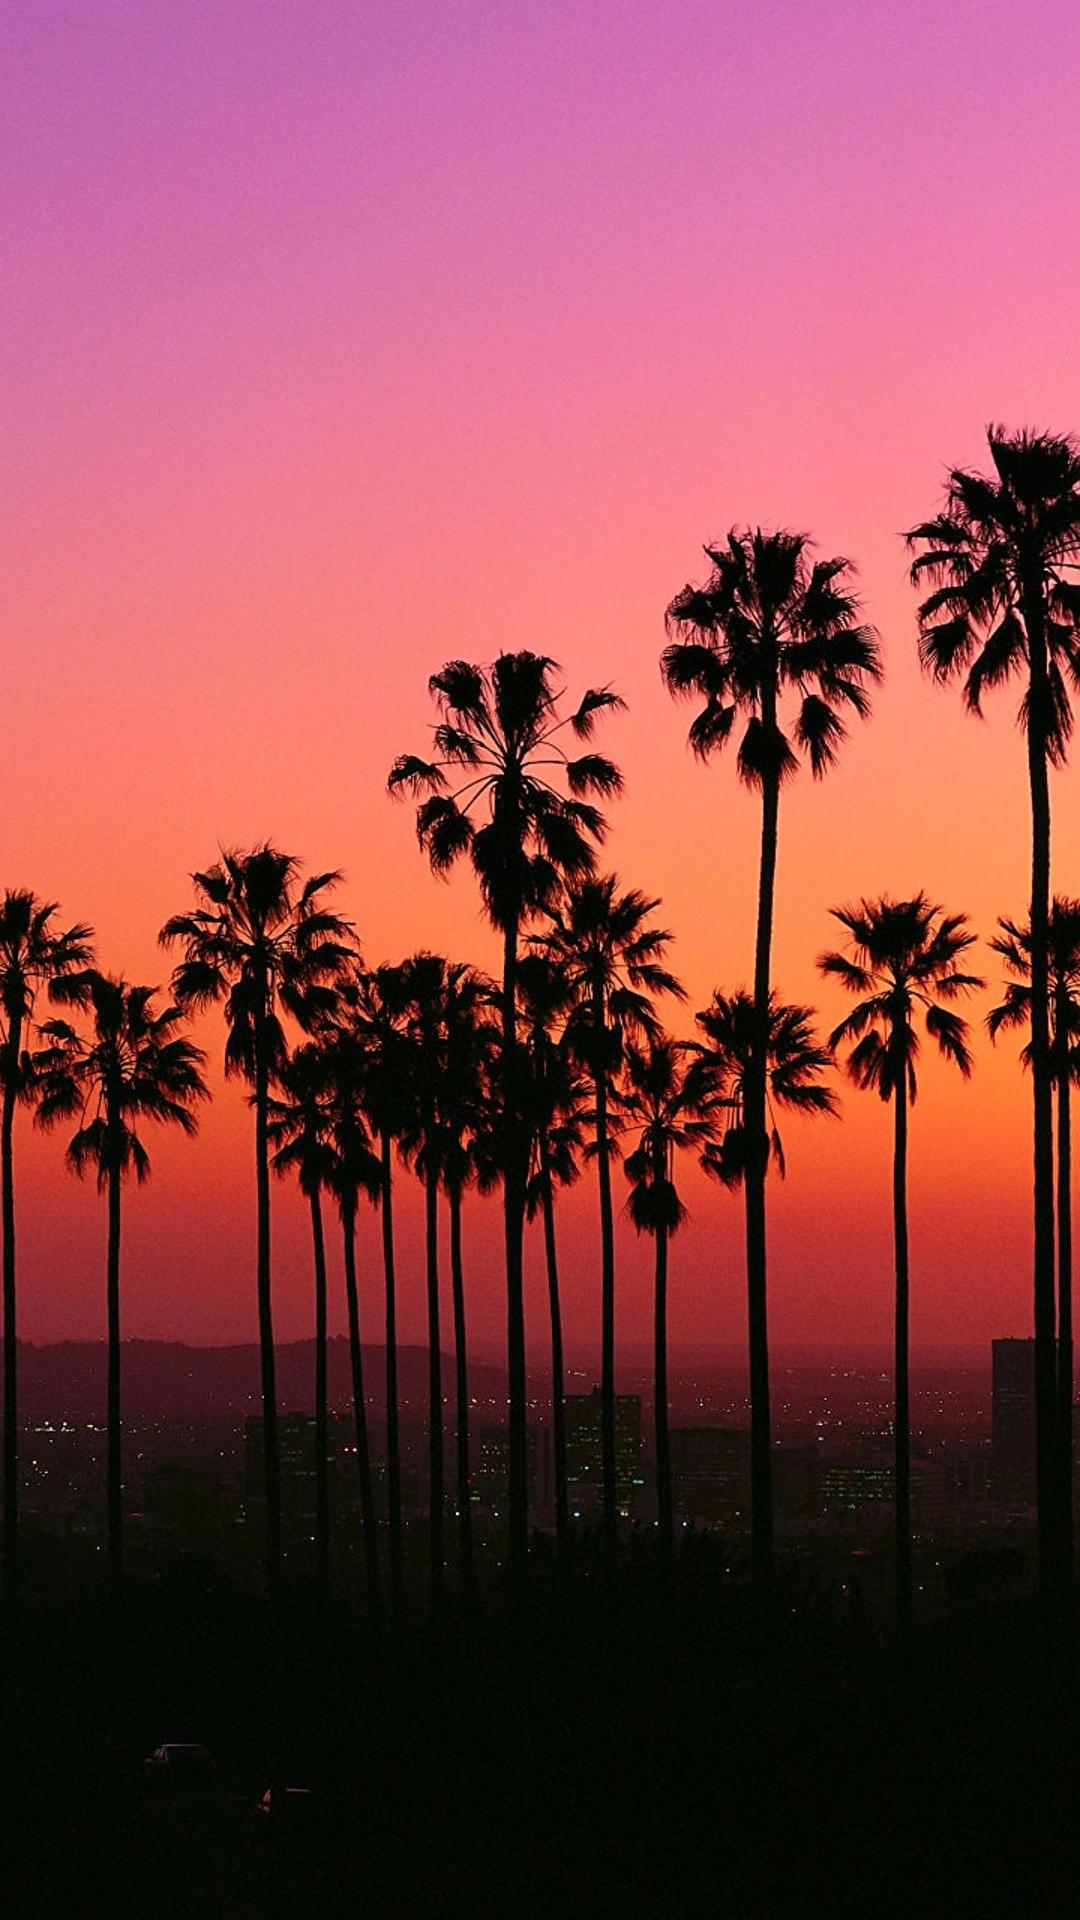 Los Angeles sunset with palm trees .reddit.com